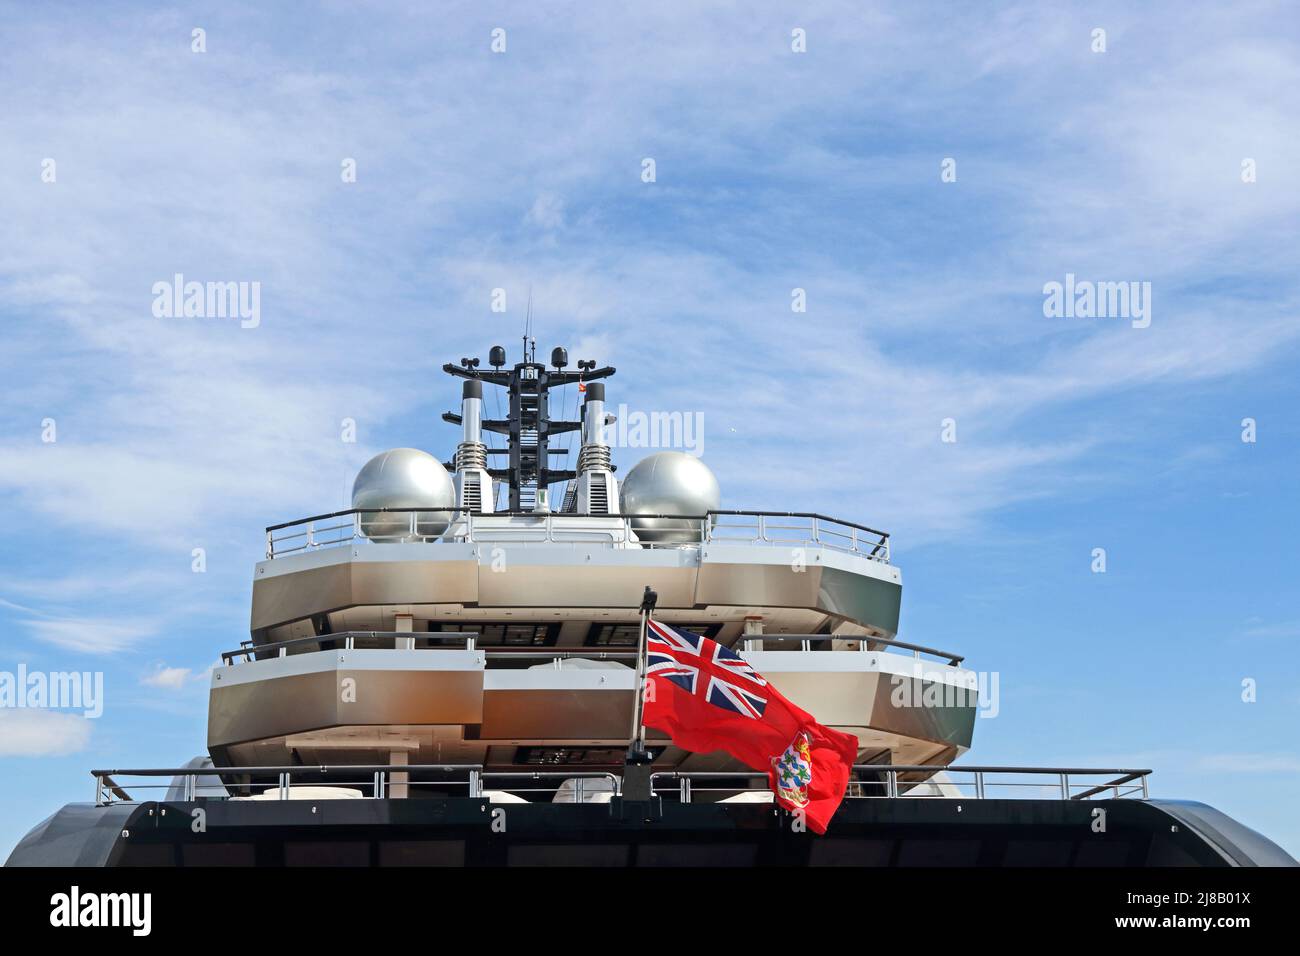 Superstructure of Superyacht 'Crescent' Stock Photo